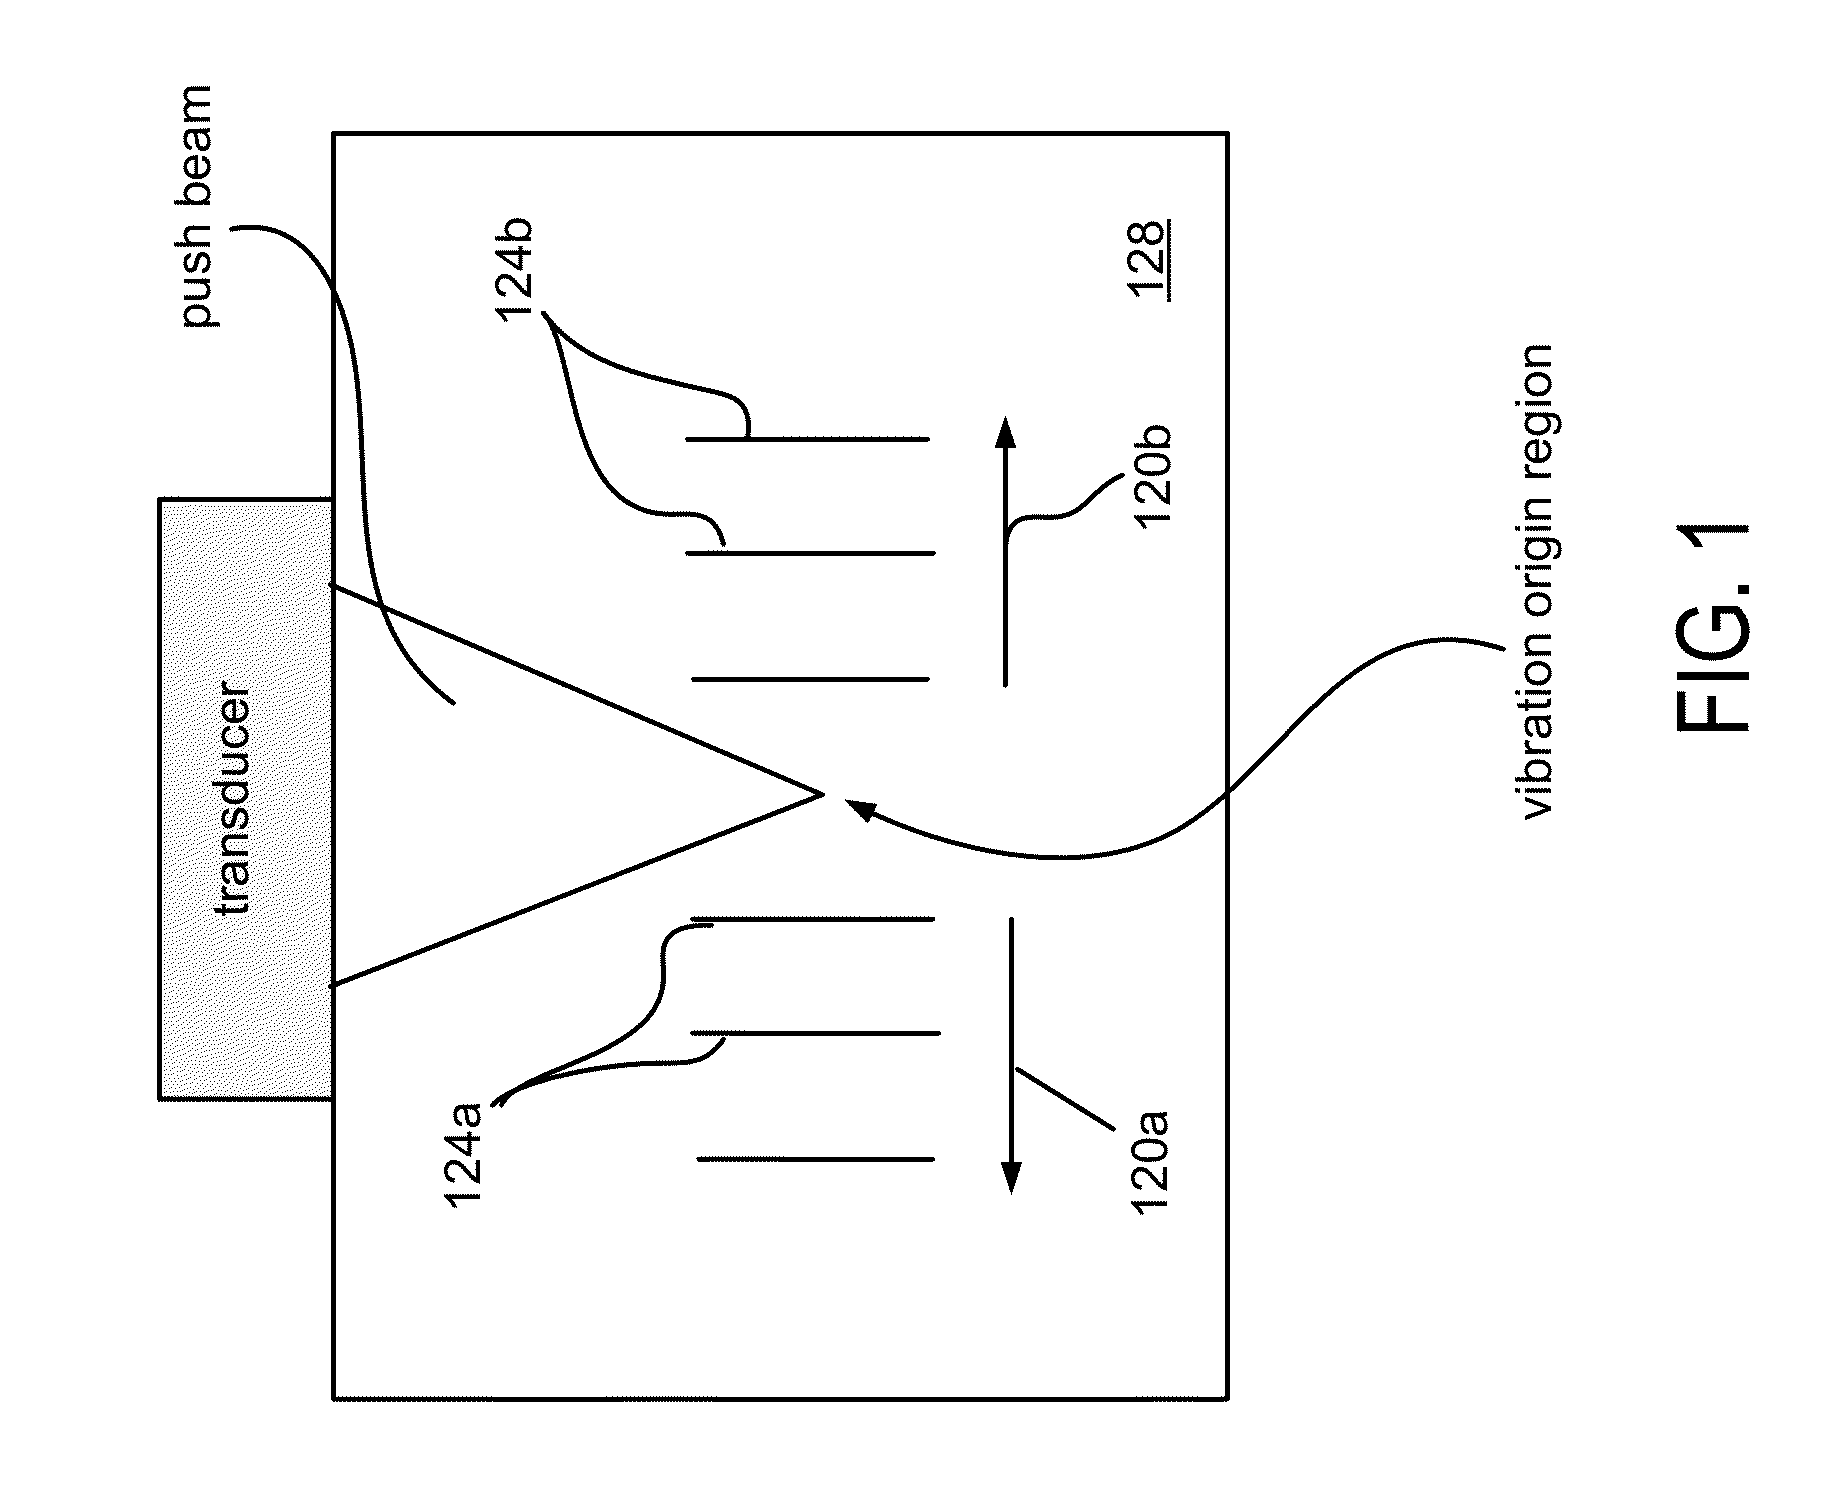 System and method for non-invasive measurement of carpal tunnel pressure